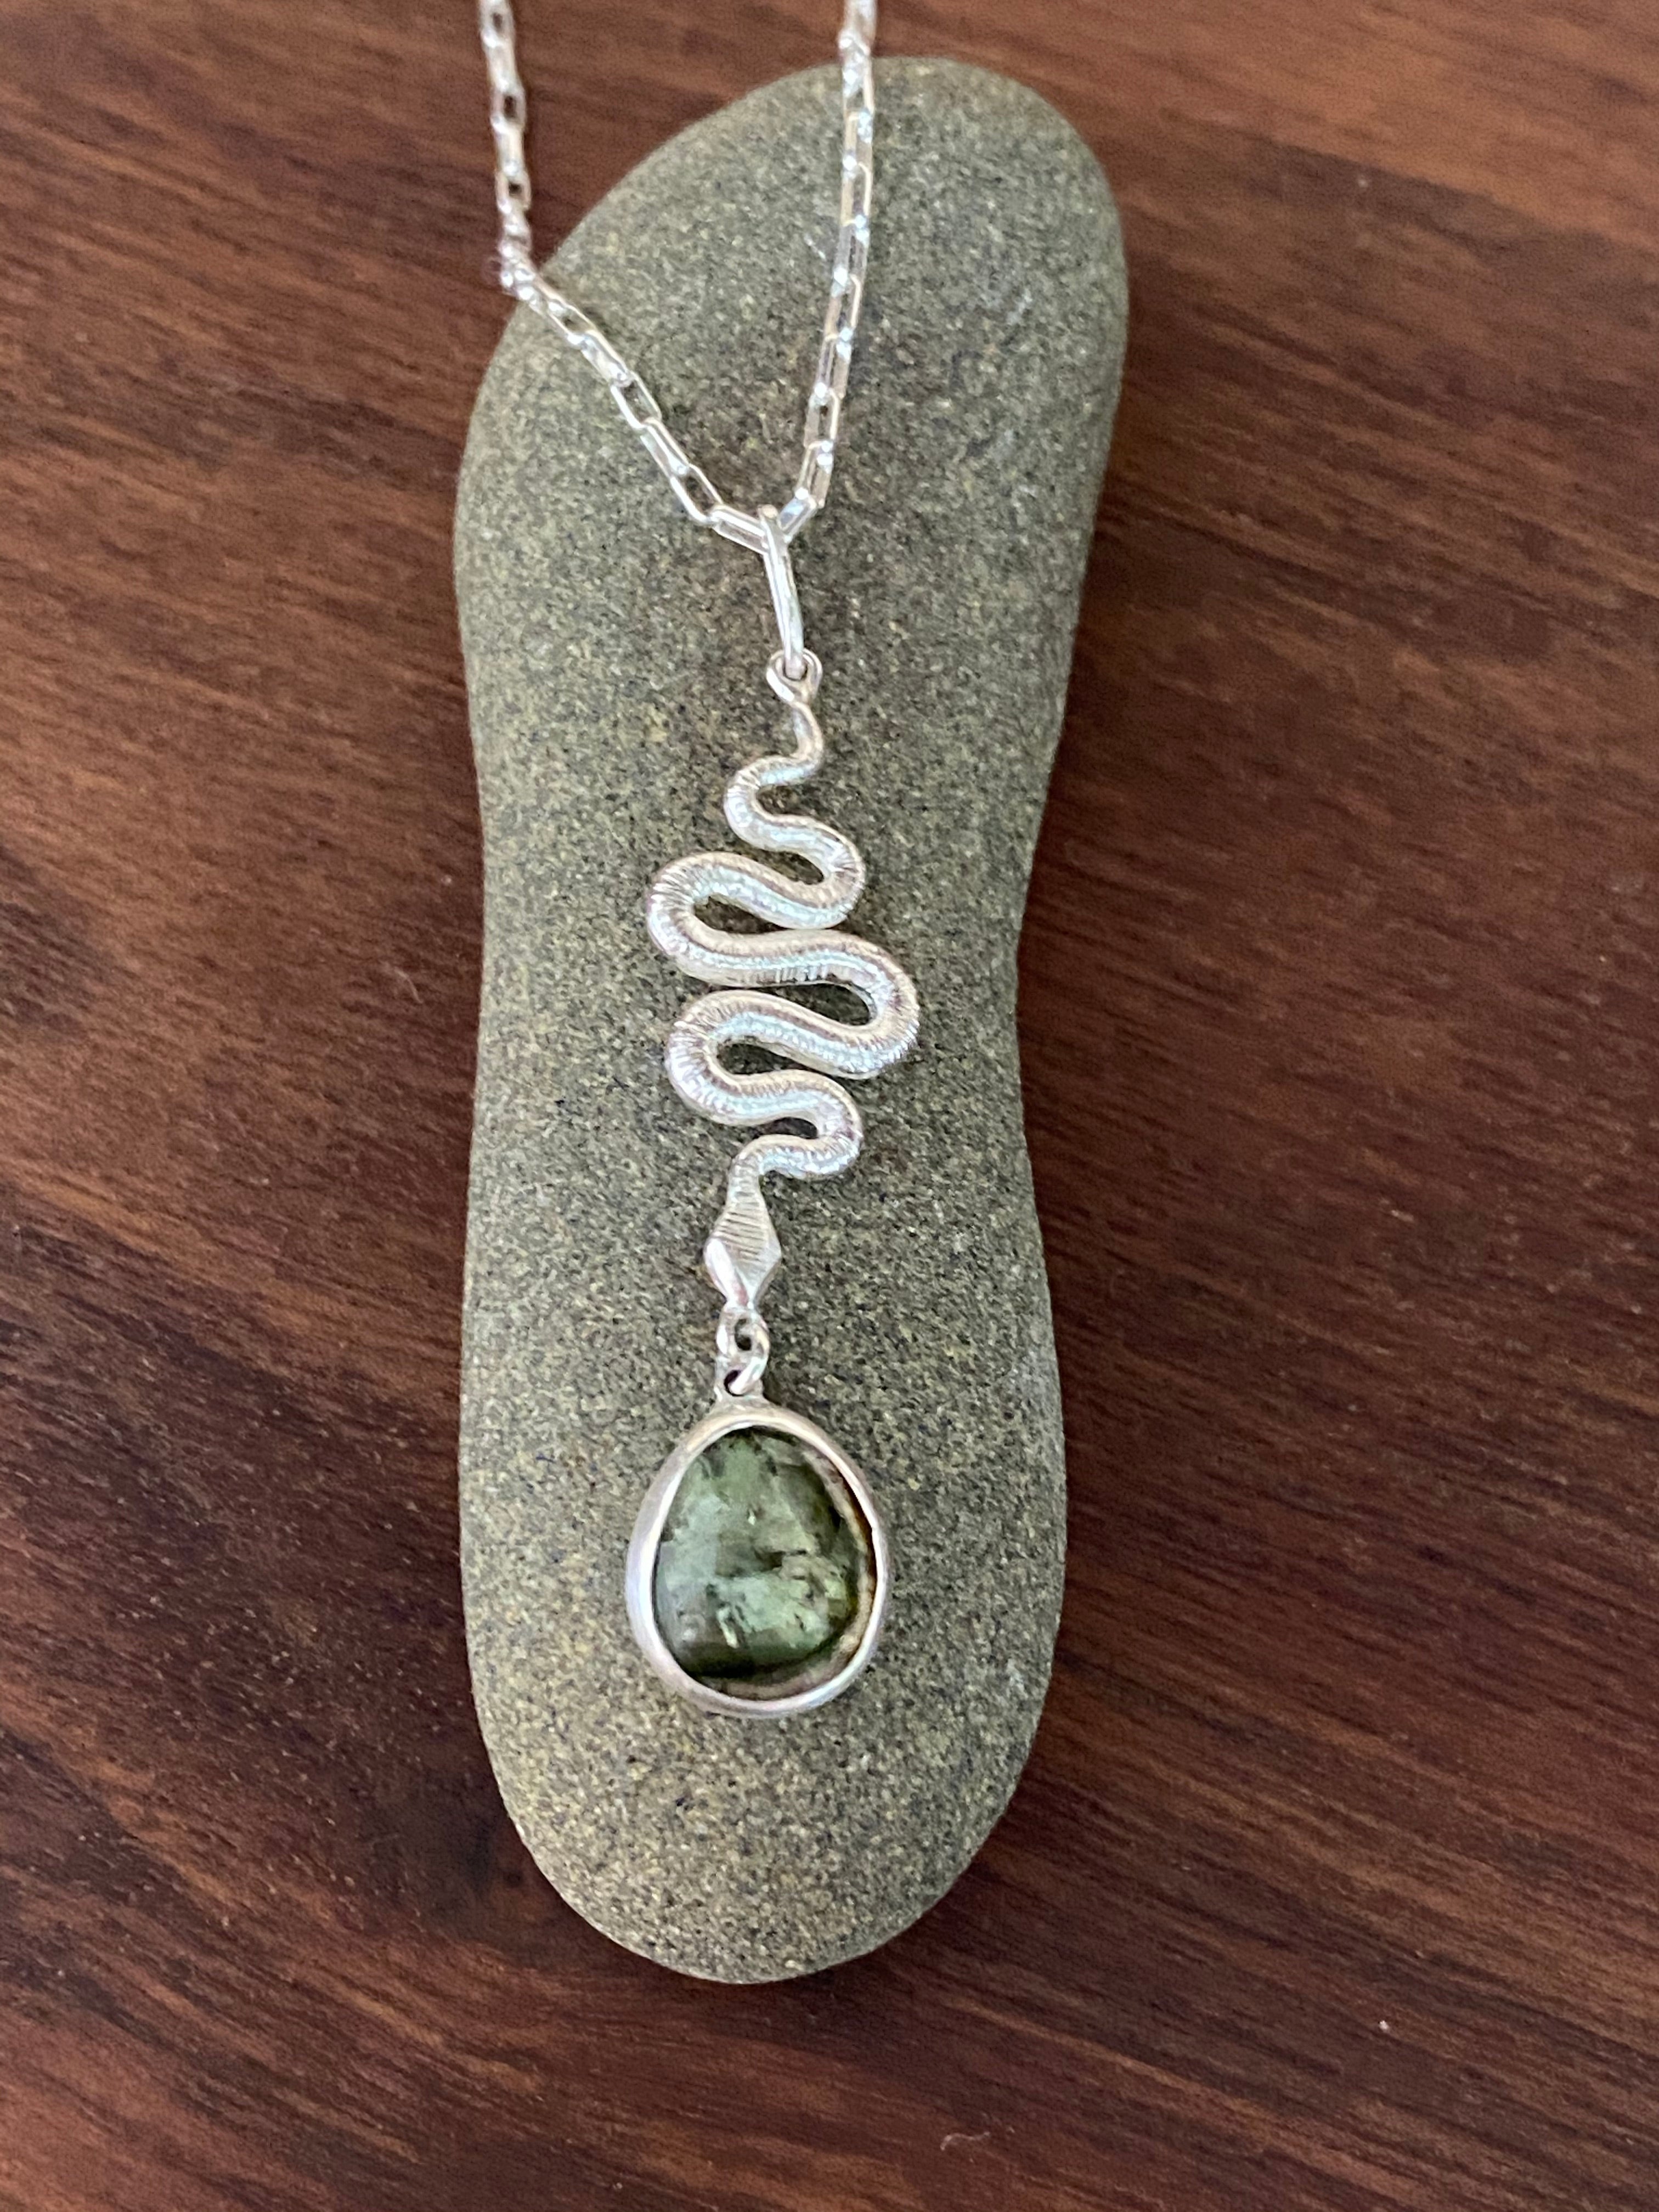 Koedyker Crafted- Serpent Pendant with Green Tourmaline Necklace